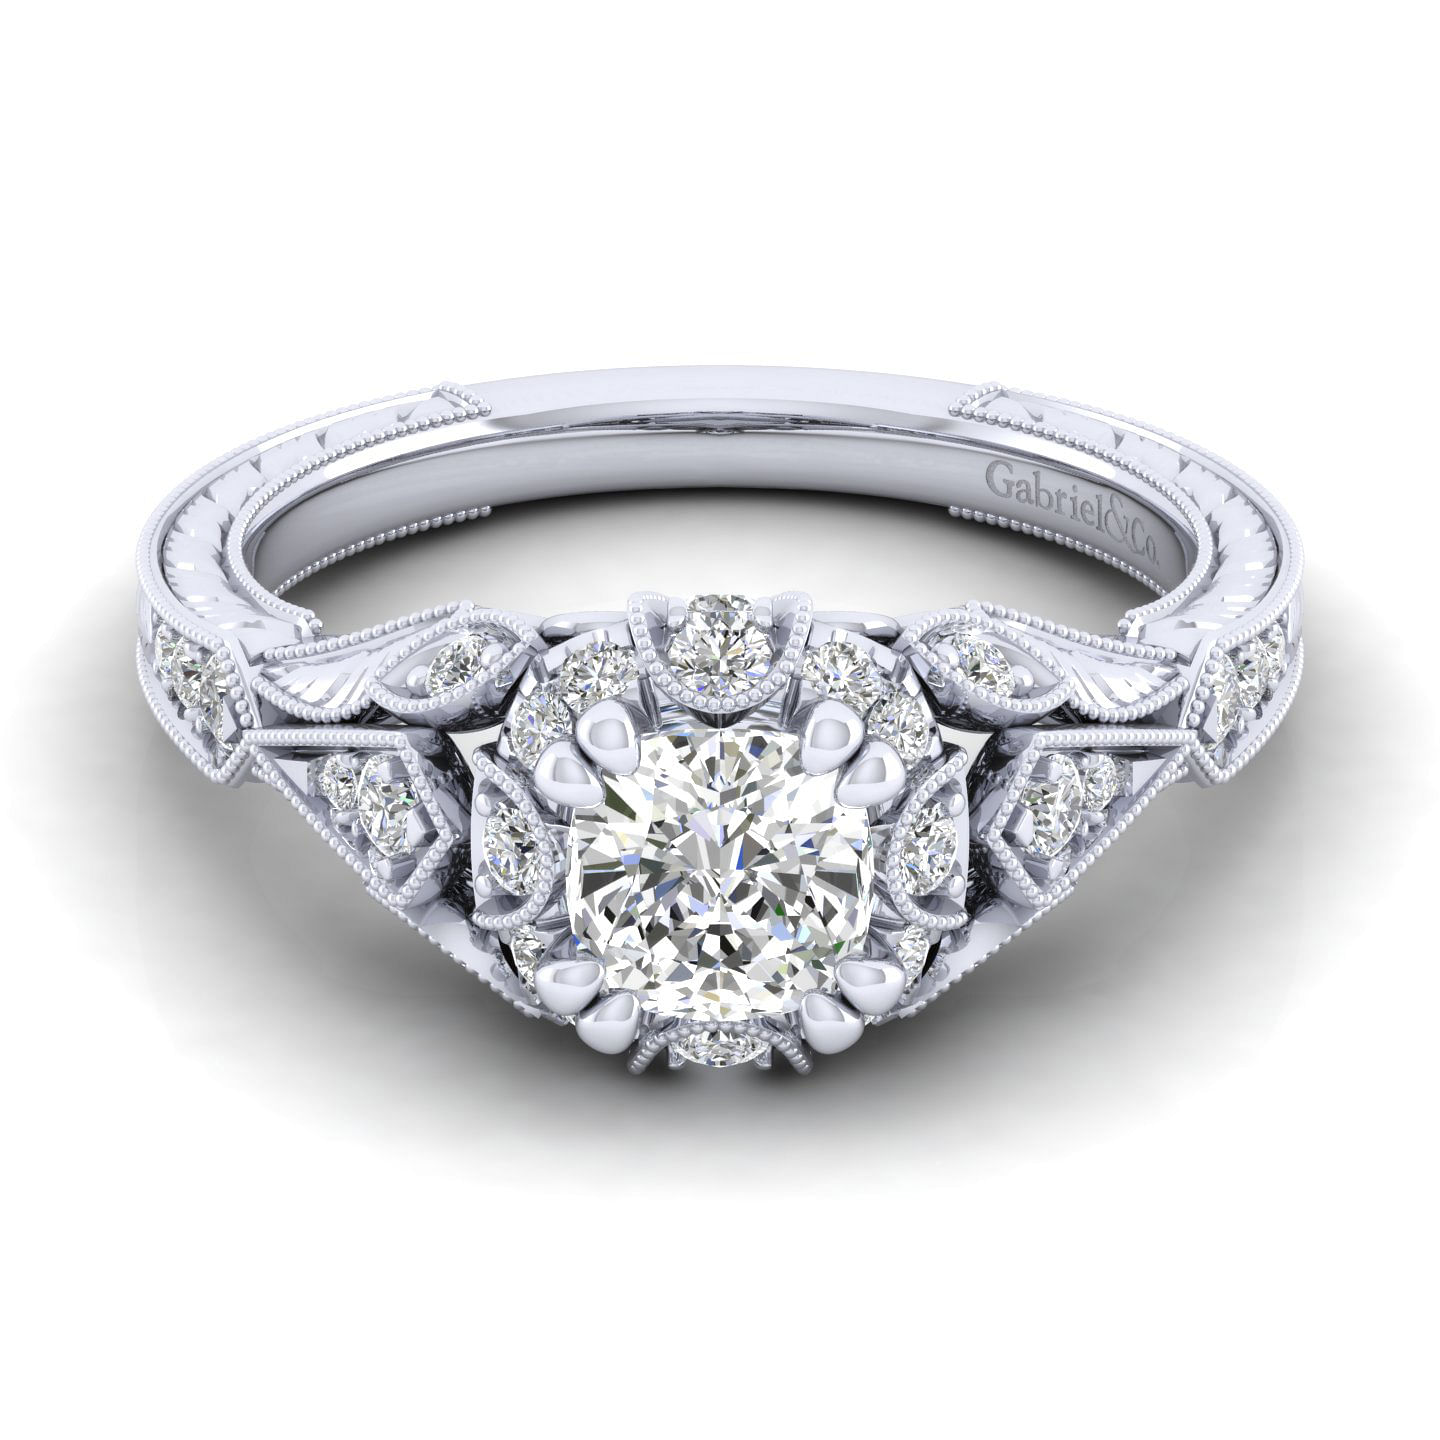 Annadale - Unique 14K White Gold Vintage Inspired Cushion Cut Diamond Halo Engagement Ring